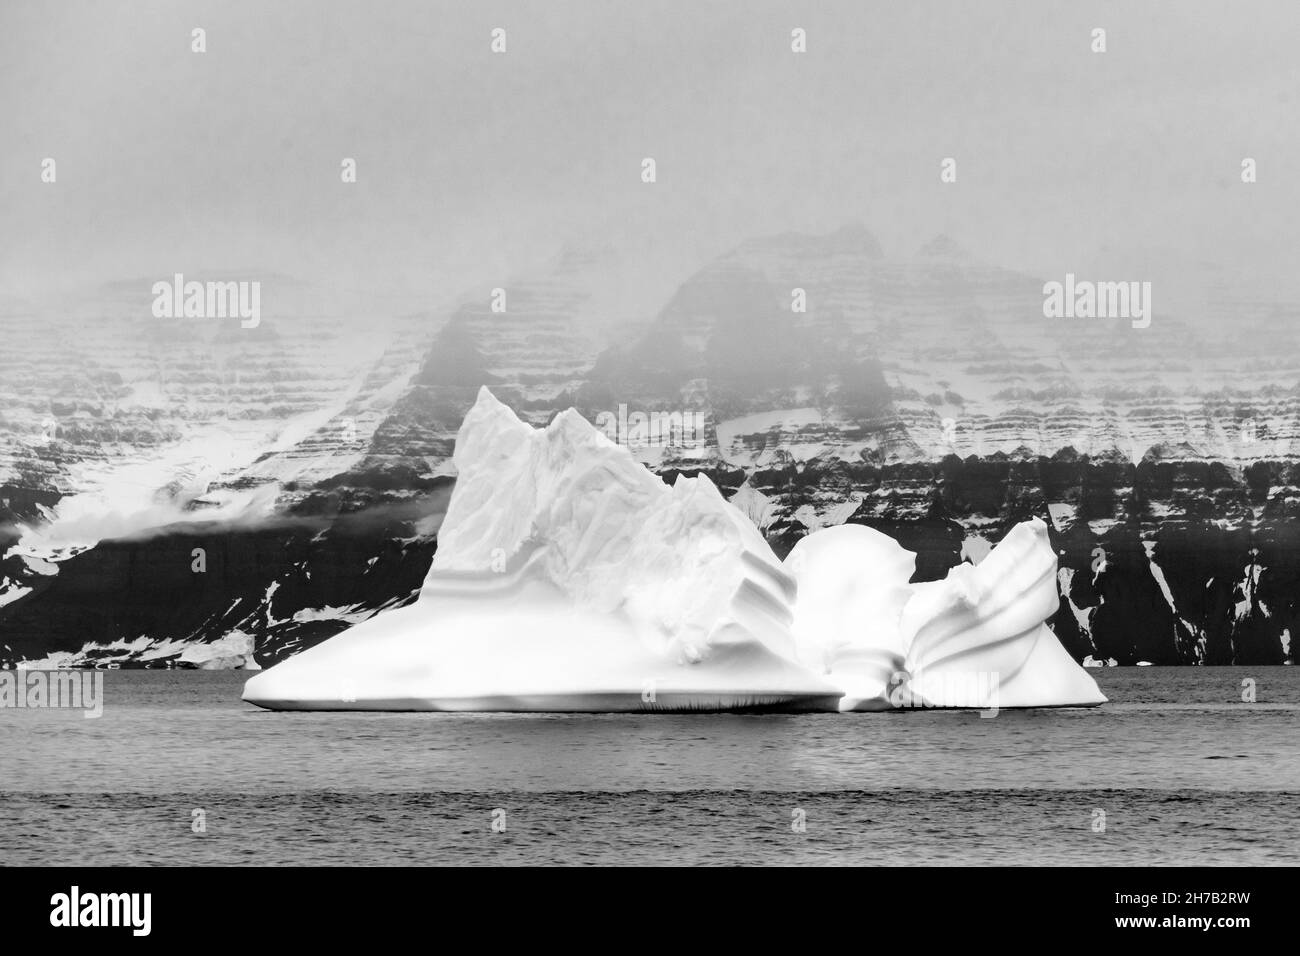 Shape and strations in land and iceberg, Geikie Plateau, Scoresby Sund, East Greenland Stock Photo